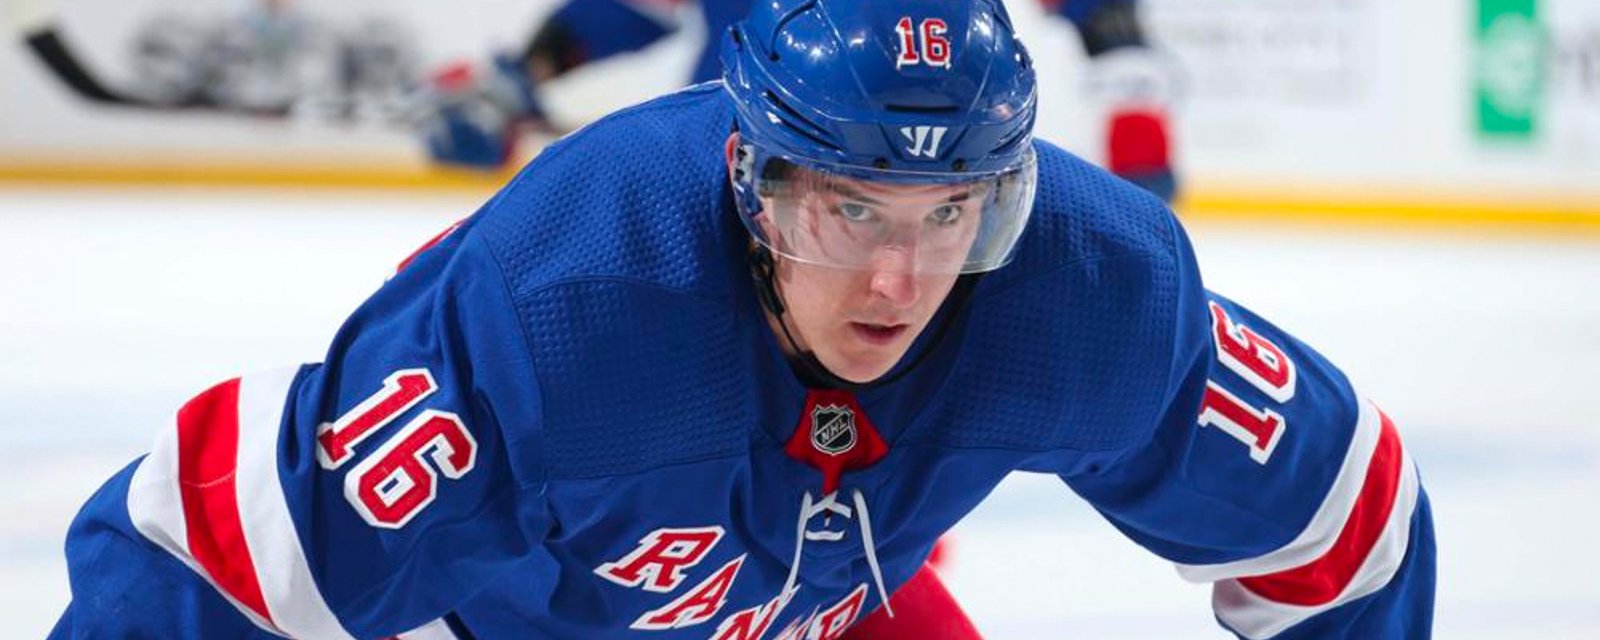 Reports indicate that Ryan Strome is done with the Rangers